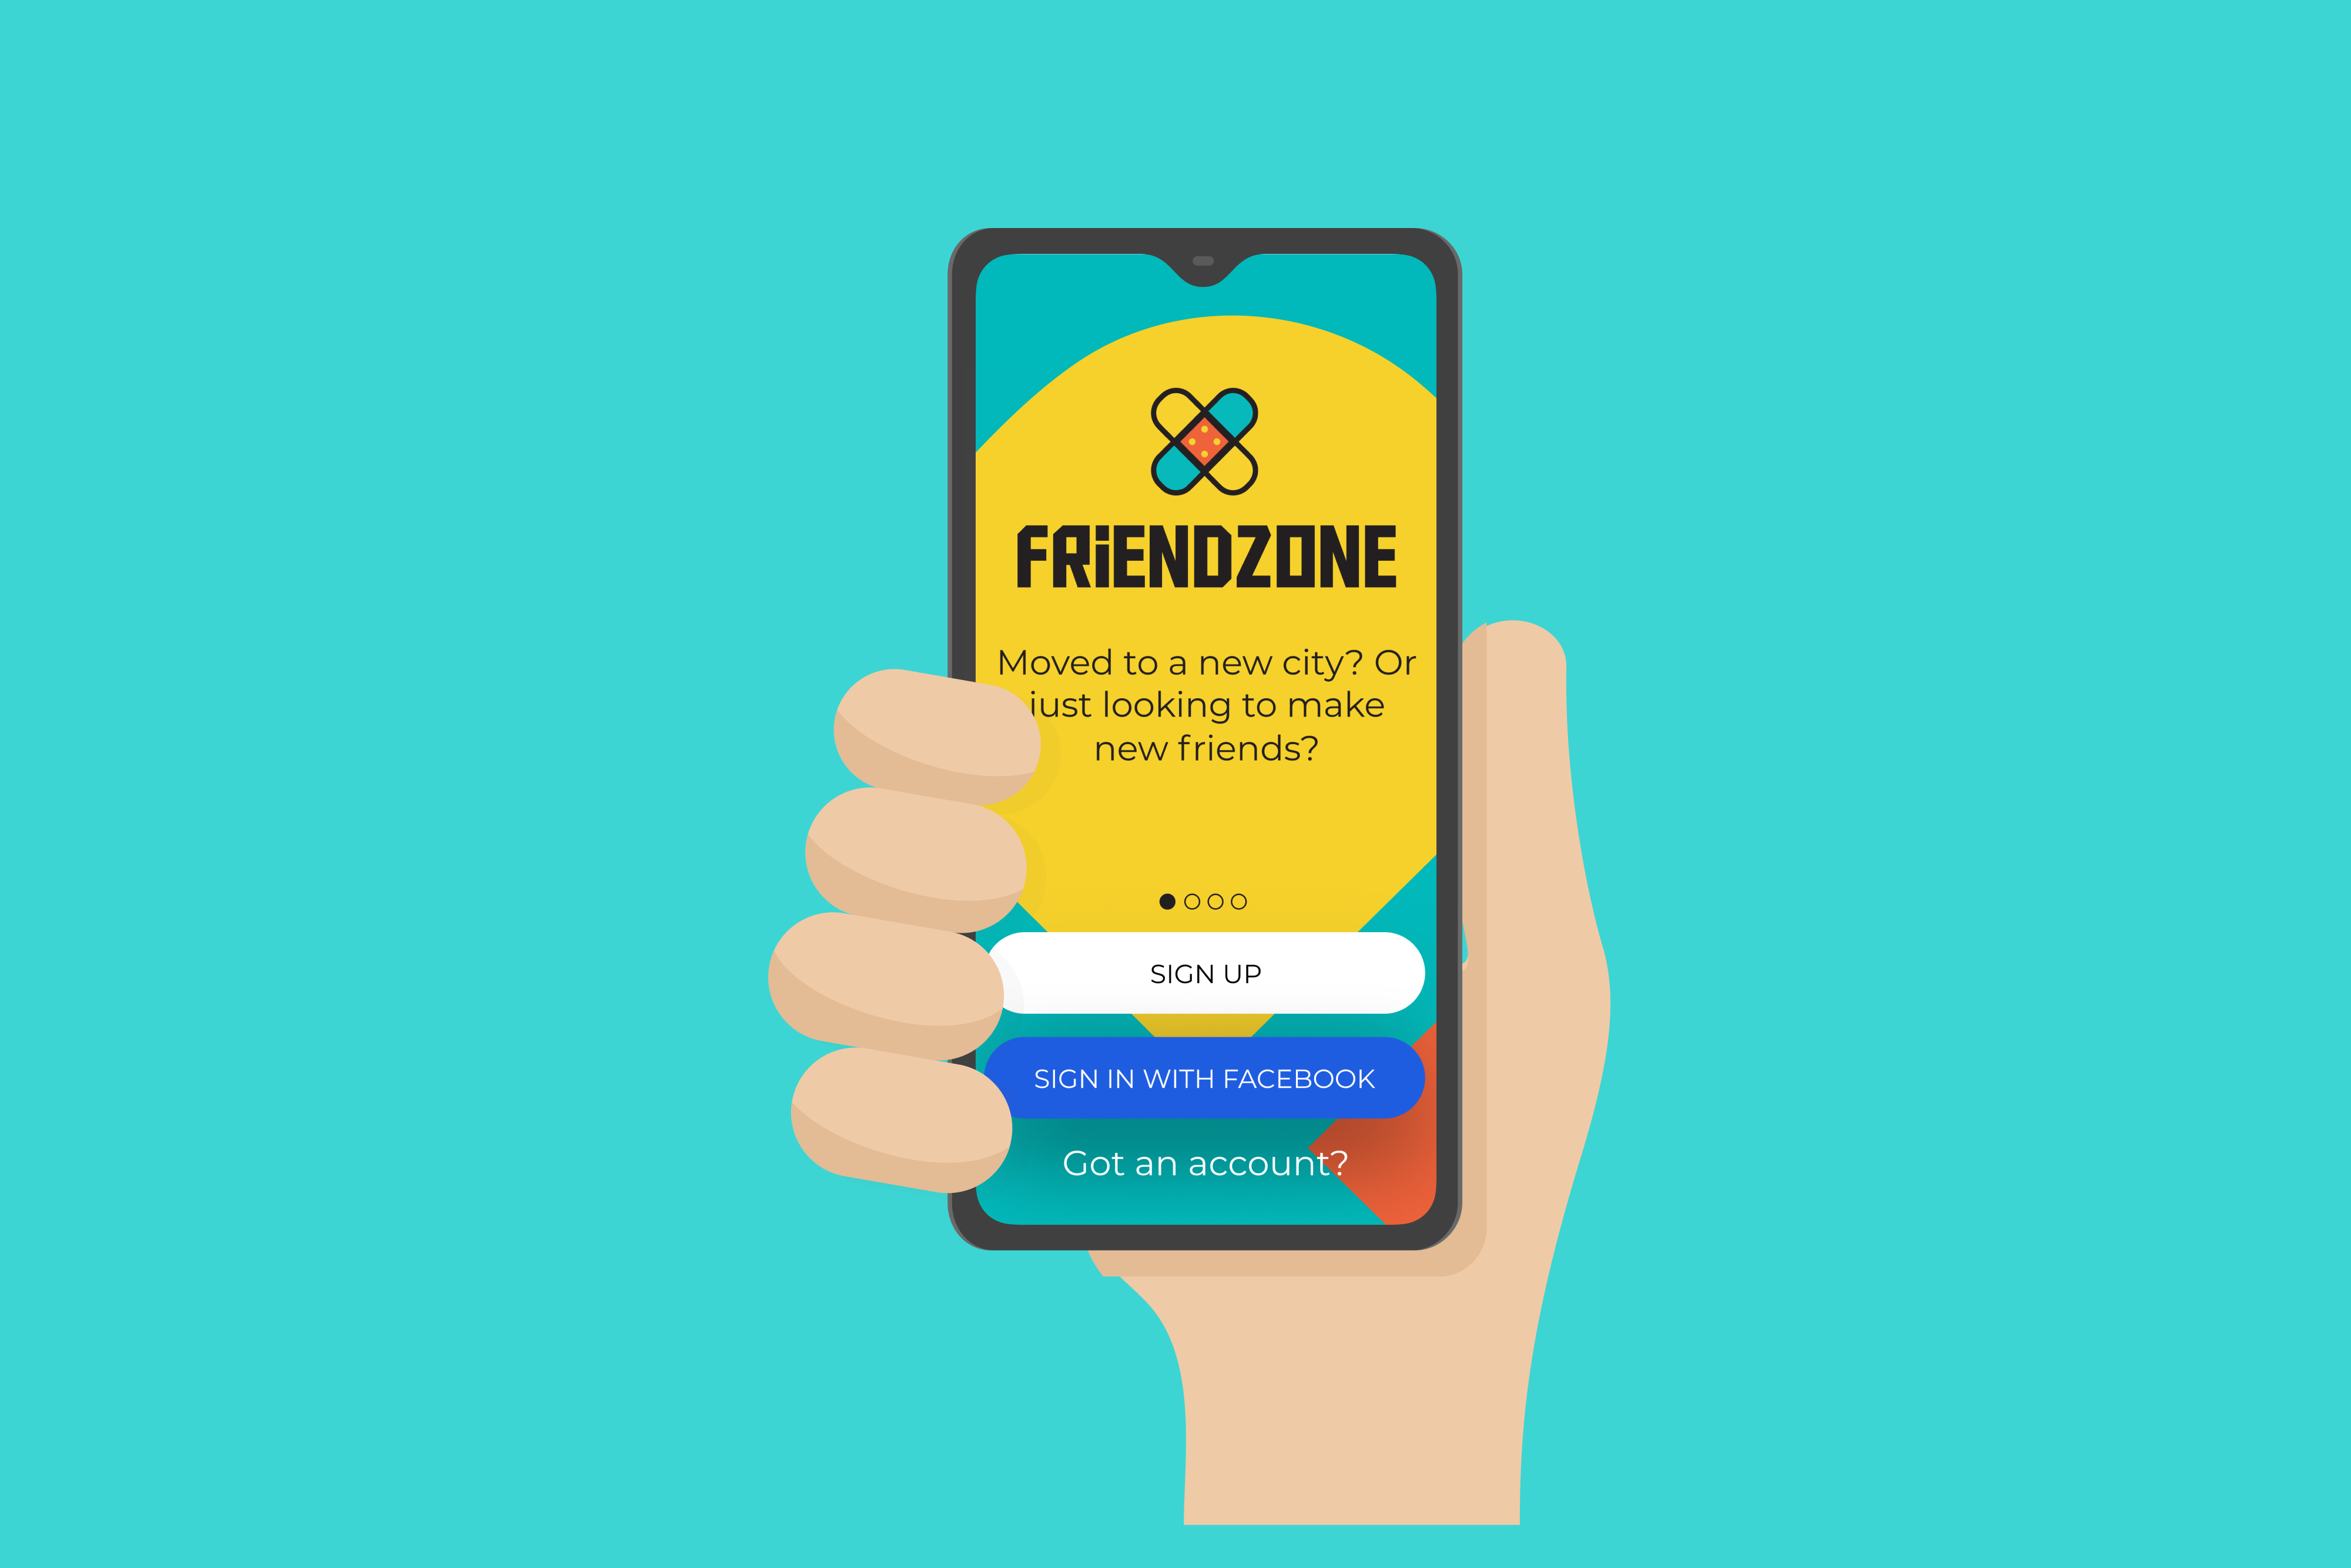 Signing up to the FriendZone app to find new friends